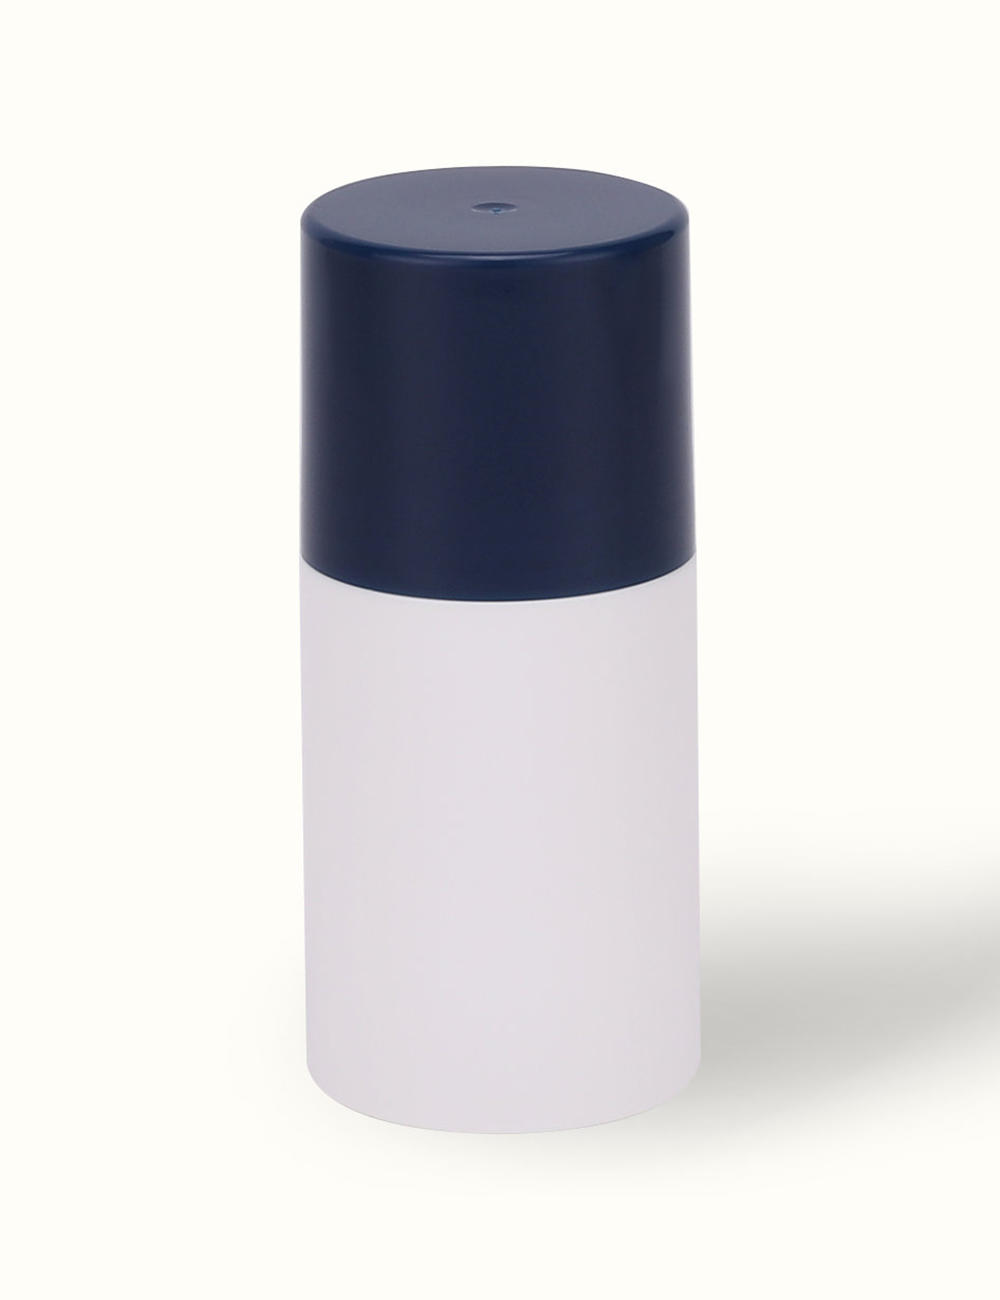 PP conical roll on bottles